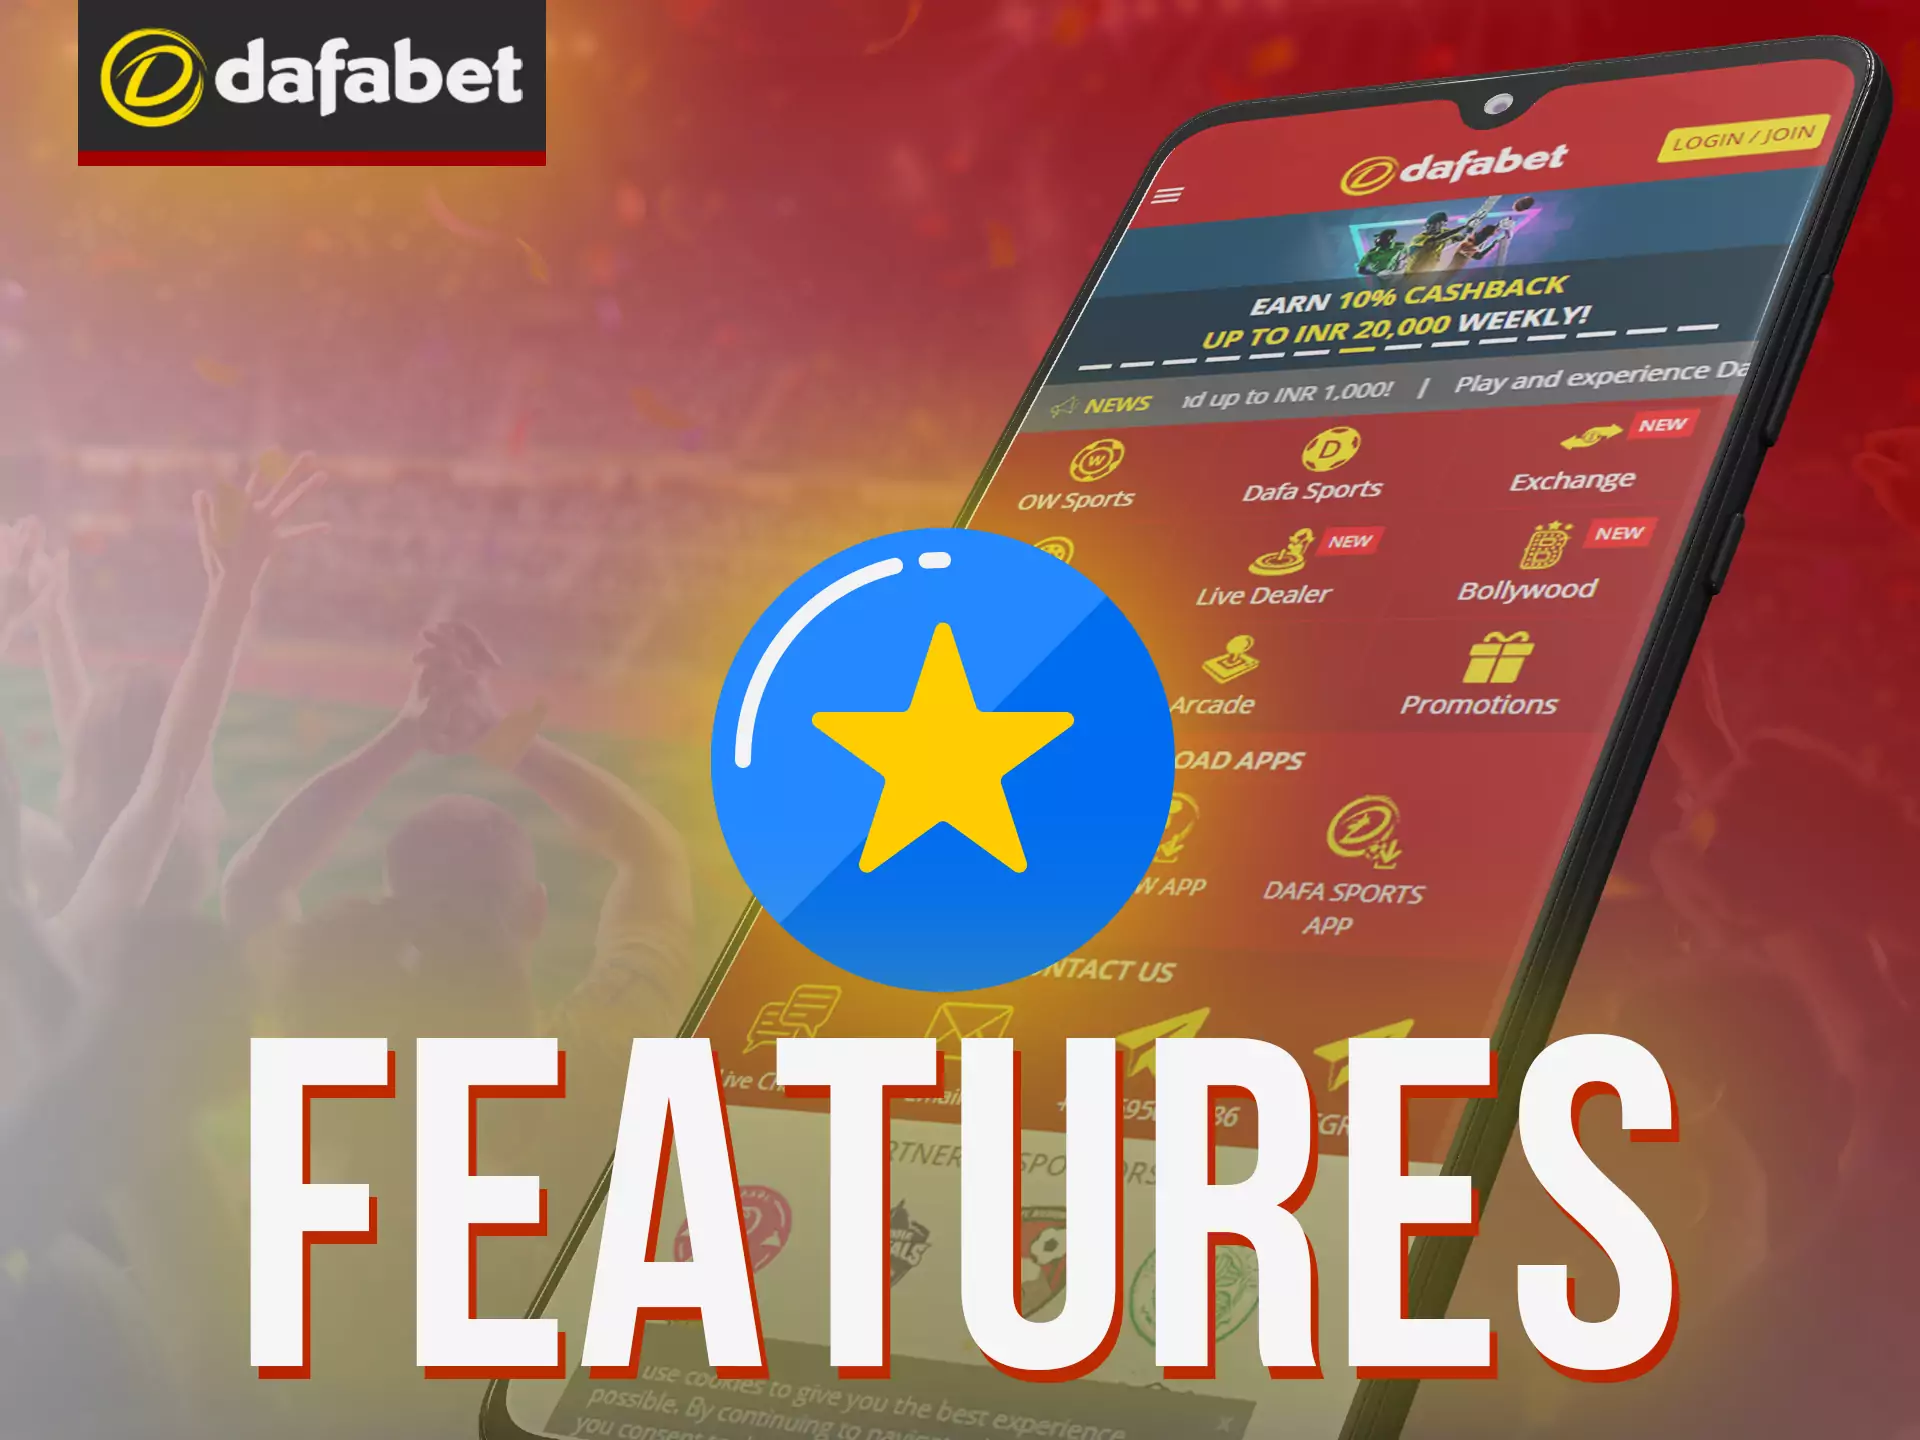 Use all of the features of Dafabet app.